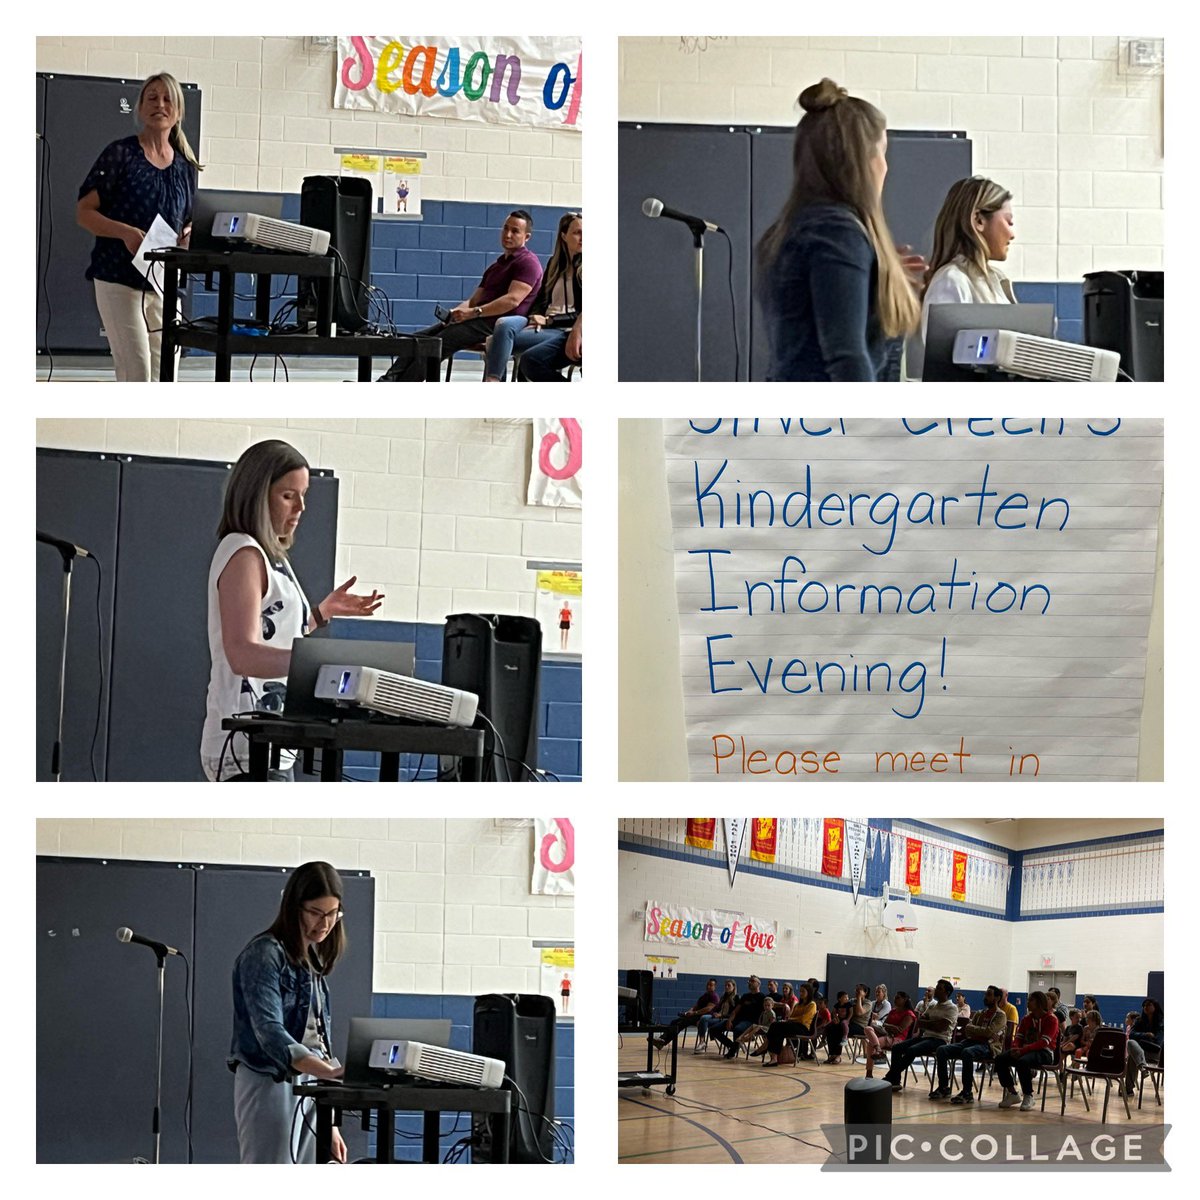 Thank you to all the families who joined us for our Kindergarten Information evening! Wonderful to see so many new Silver Creek Stars! #MySilverCreek